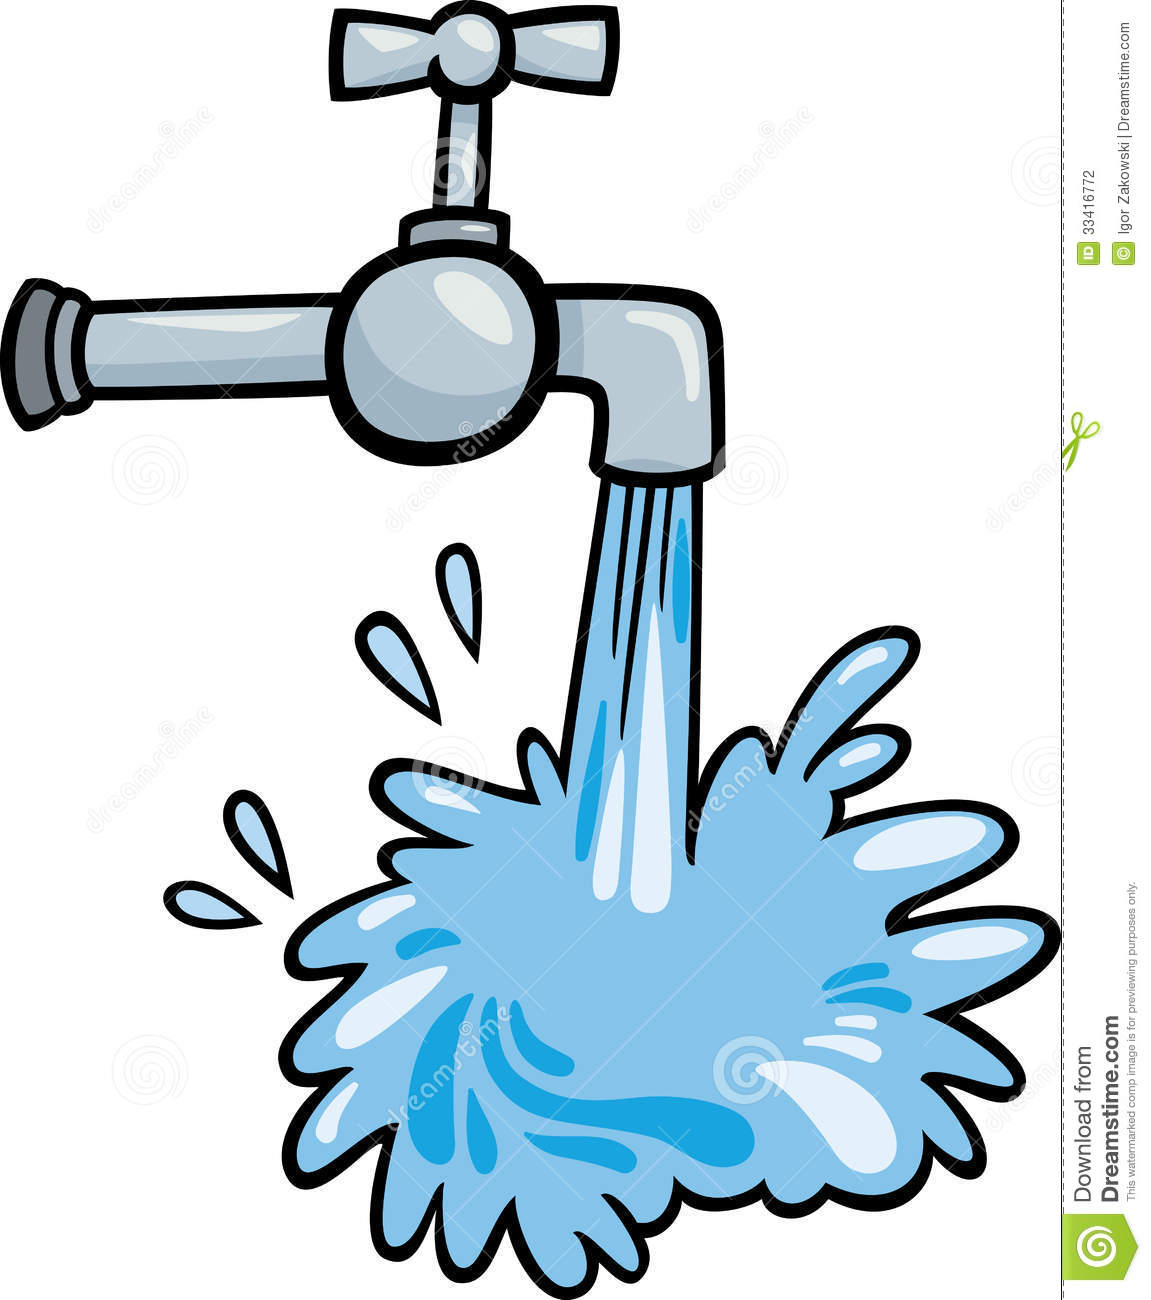 Water faucet clipart.